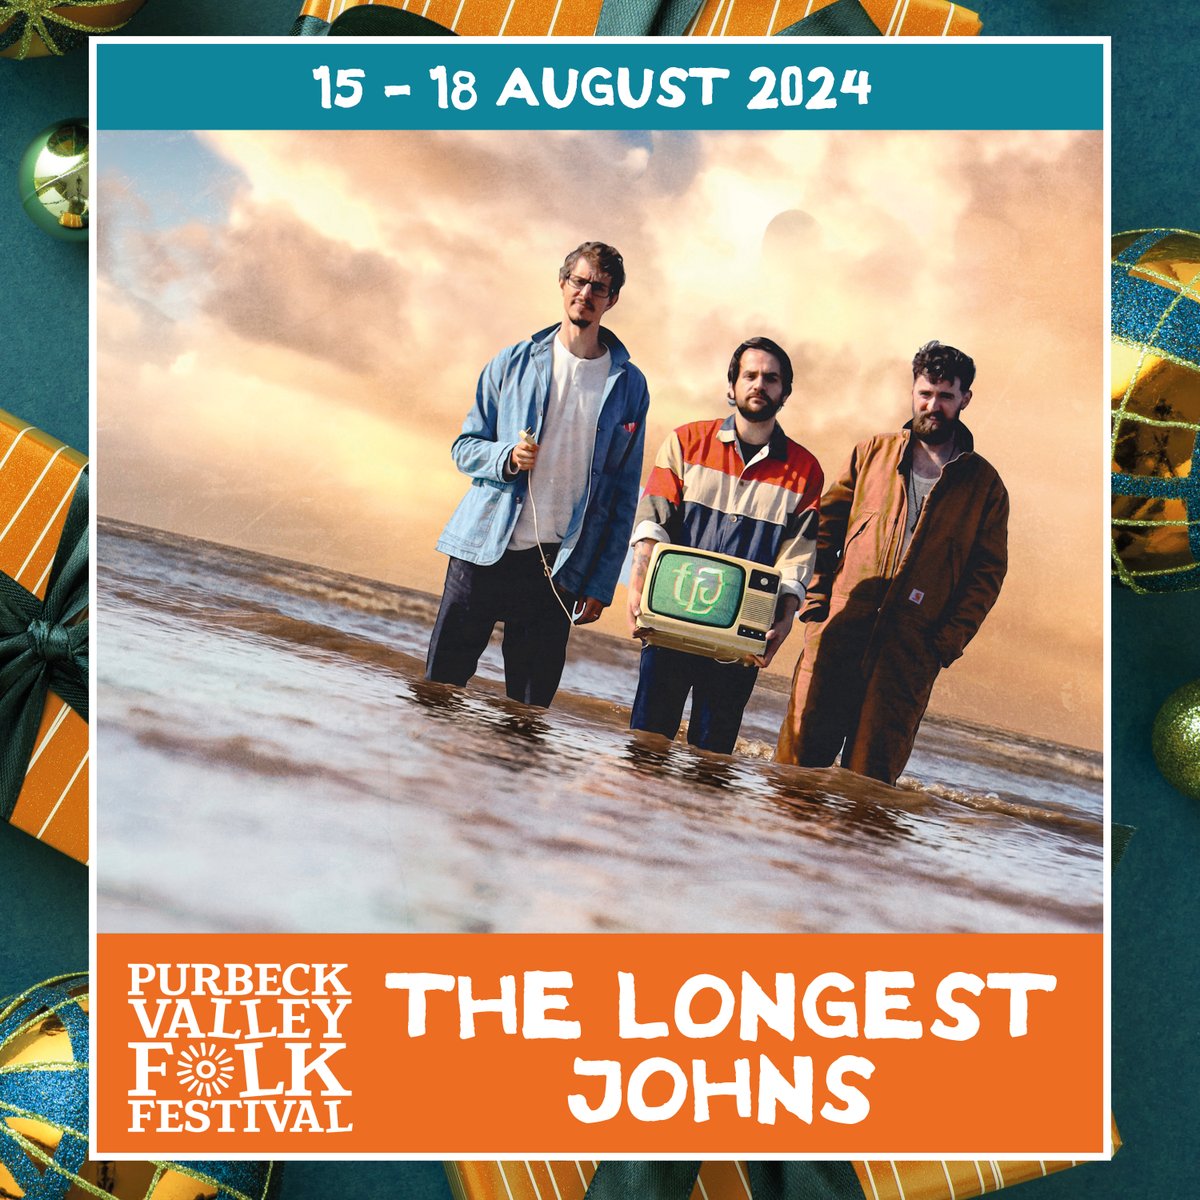 Then we're off to @PurbeckFolk in August which promises to be a delightful time on the Jurassic Coastline under the watchful gaze of Corfe Castle! purbeckvalleyfolkfestival.co.uk